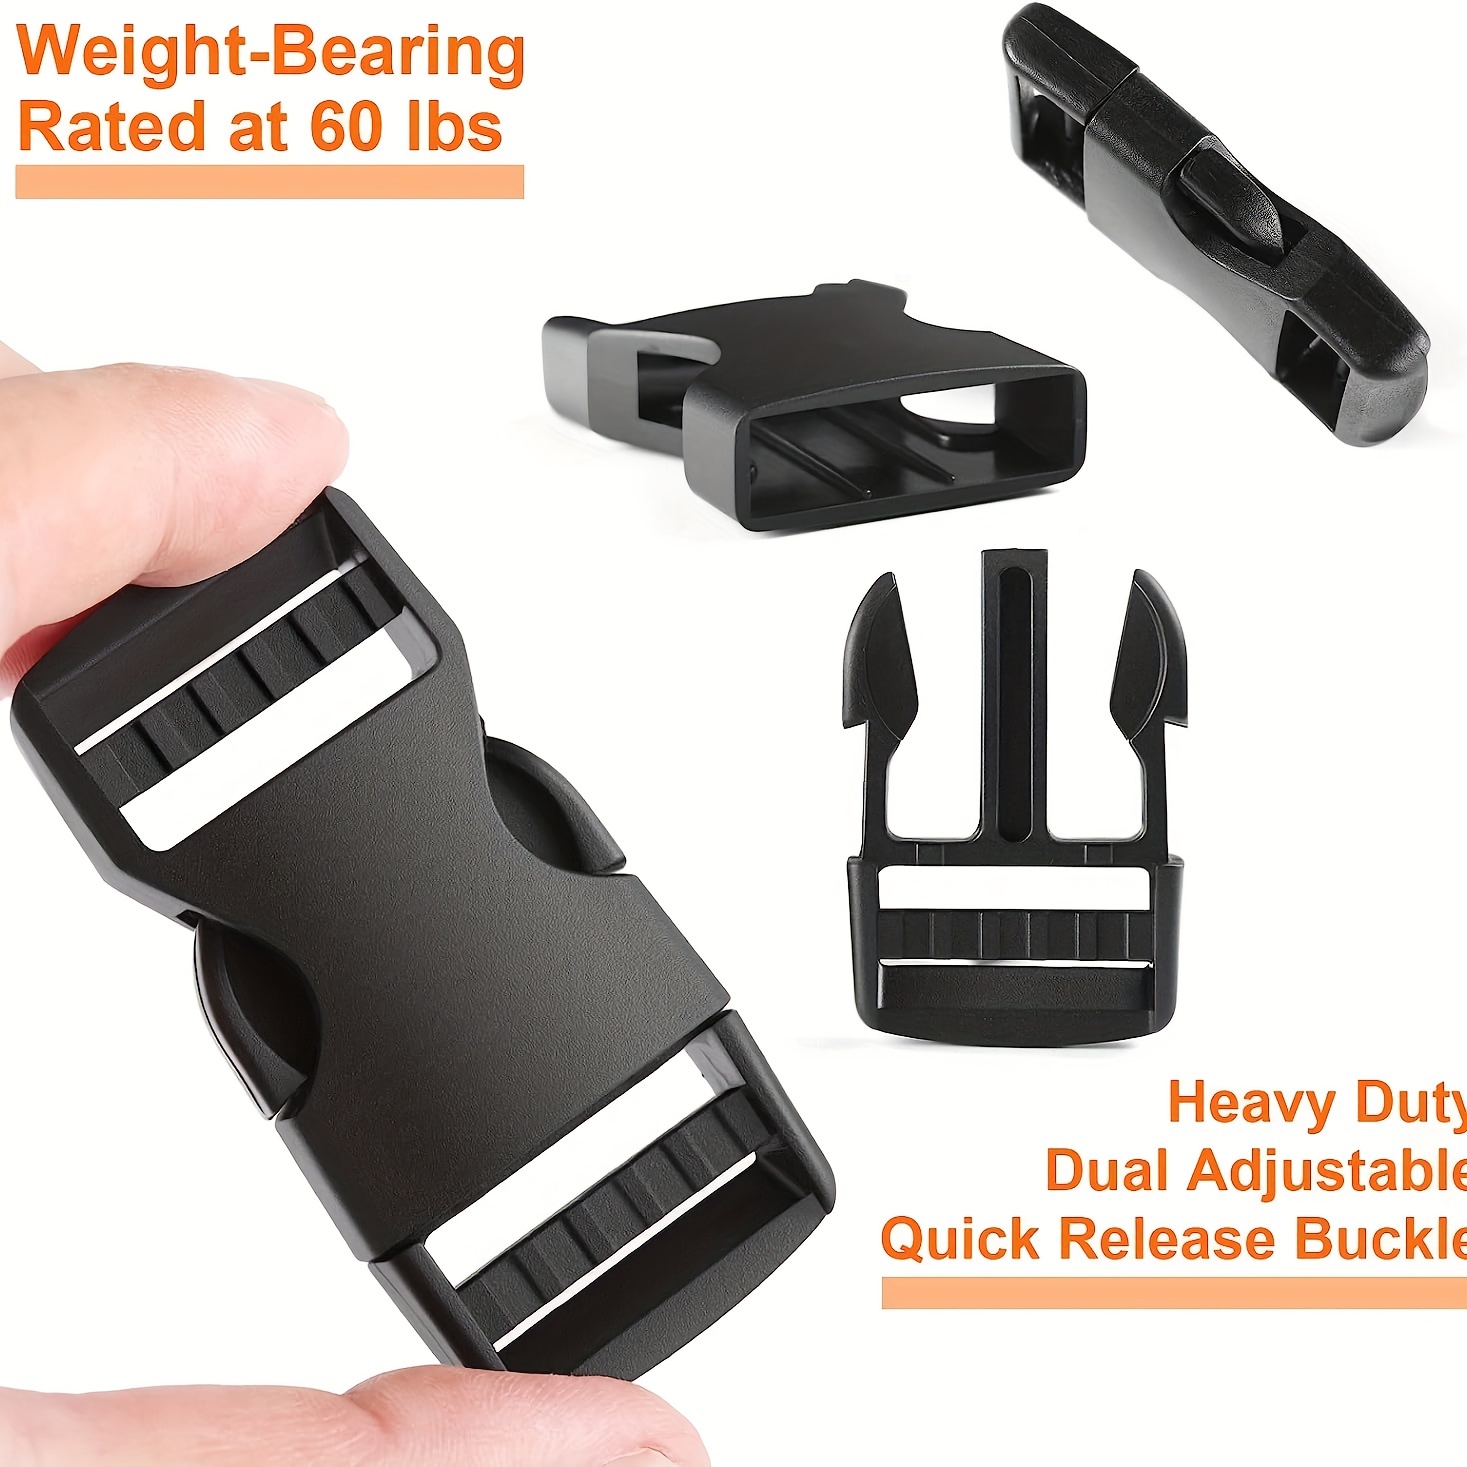 Plastic Buckles for Straps 1: Quick Side Release Buckle Clip 4